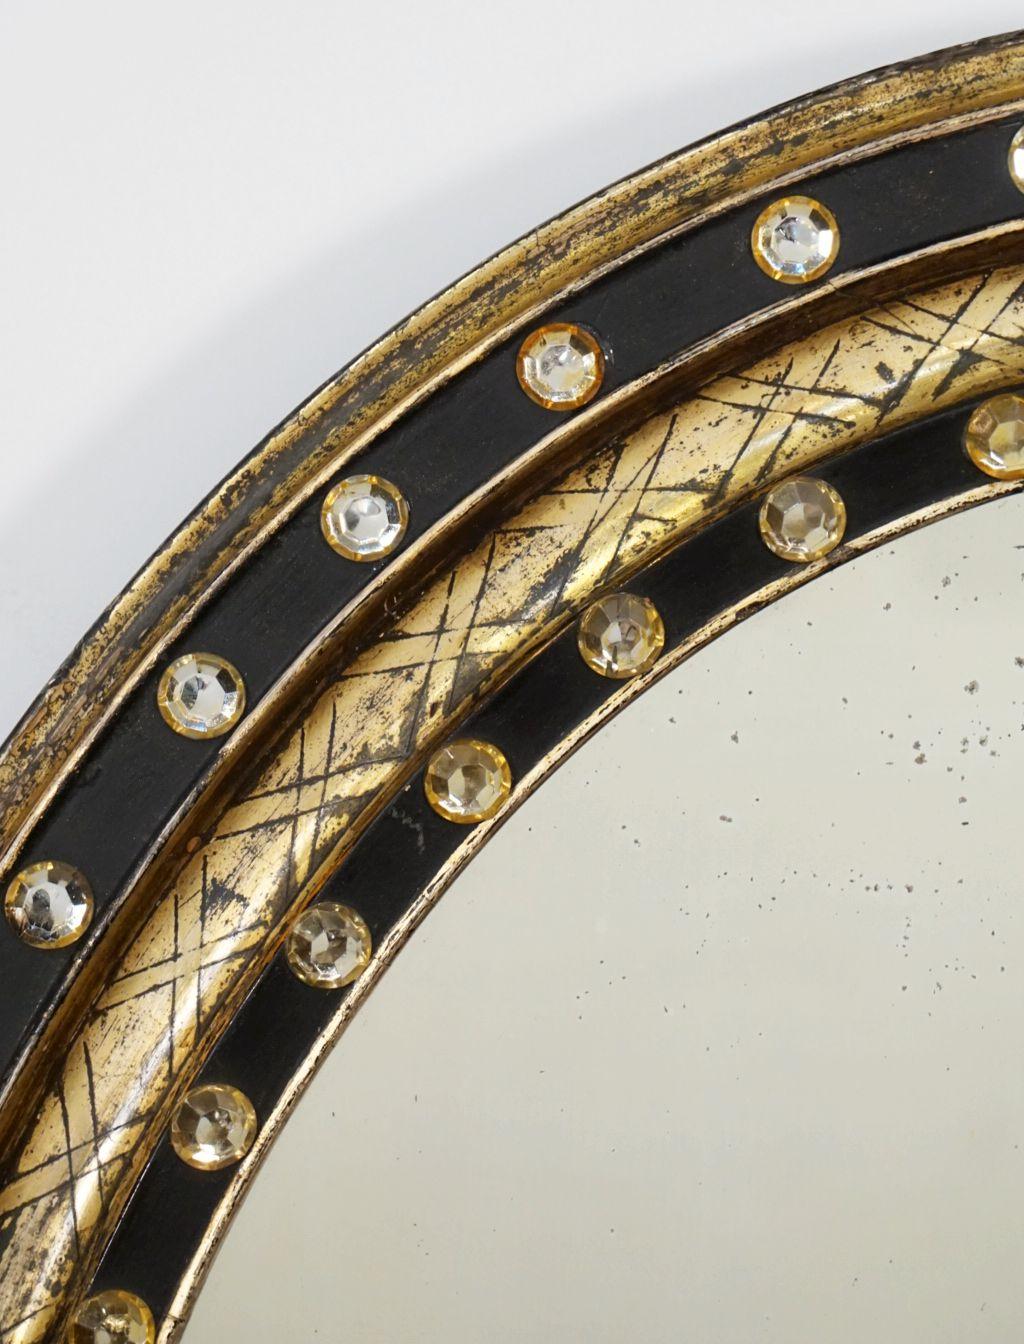 19th Century Irish Ebony and Gilt Oval Mirror with Faceted Glass Studs (H 29 1/4 x W 23 1/2)